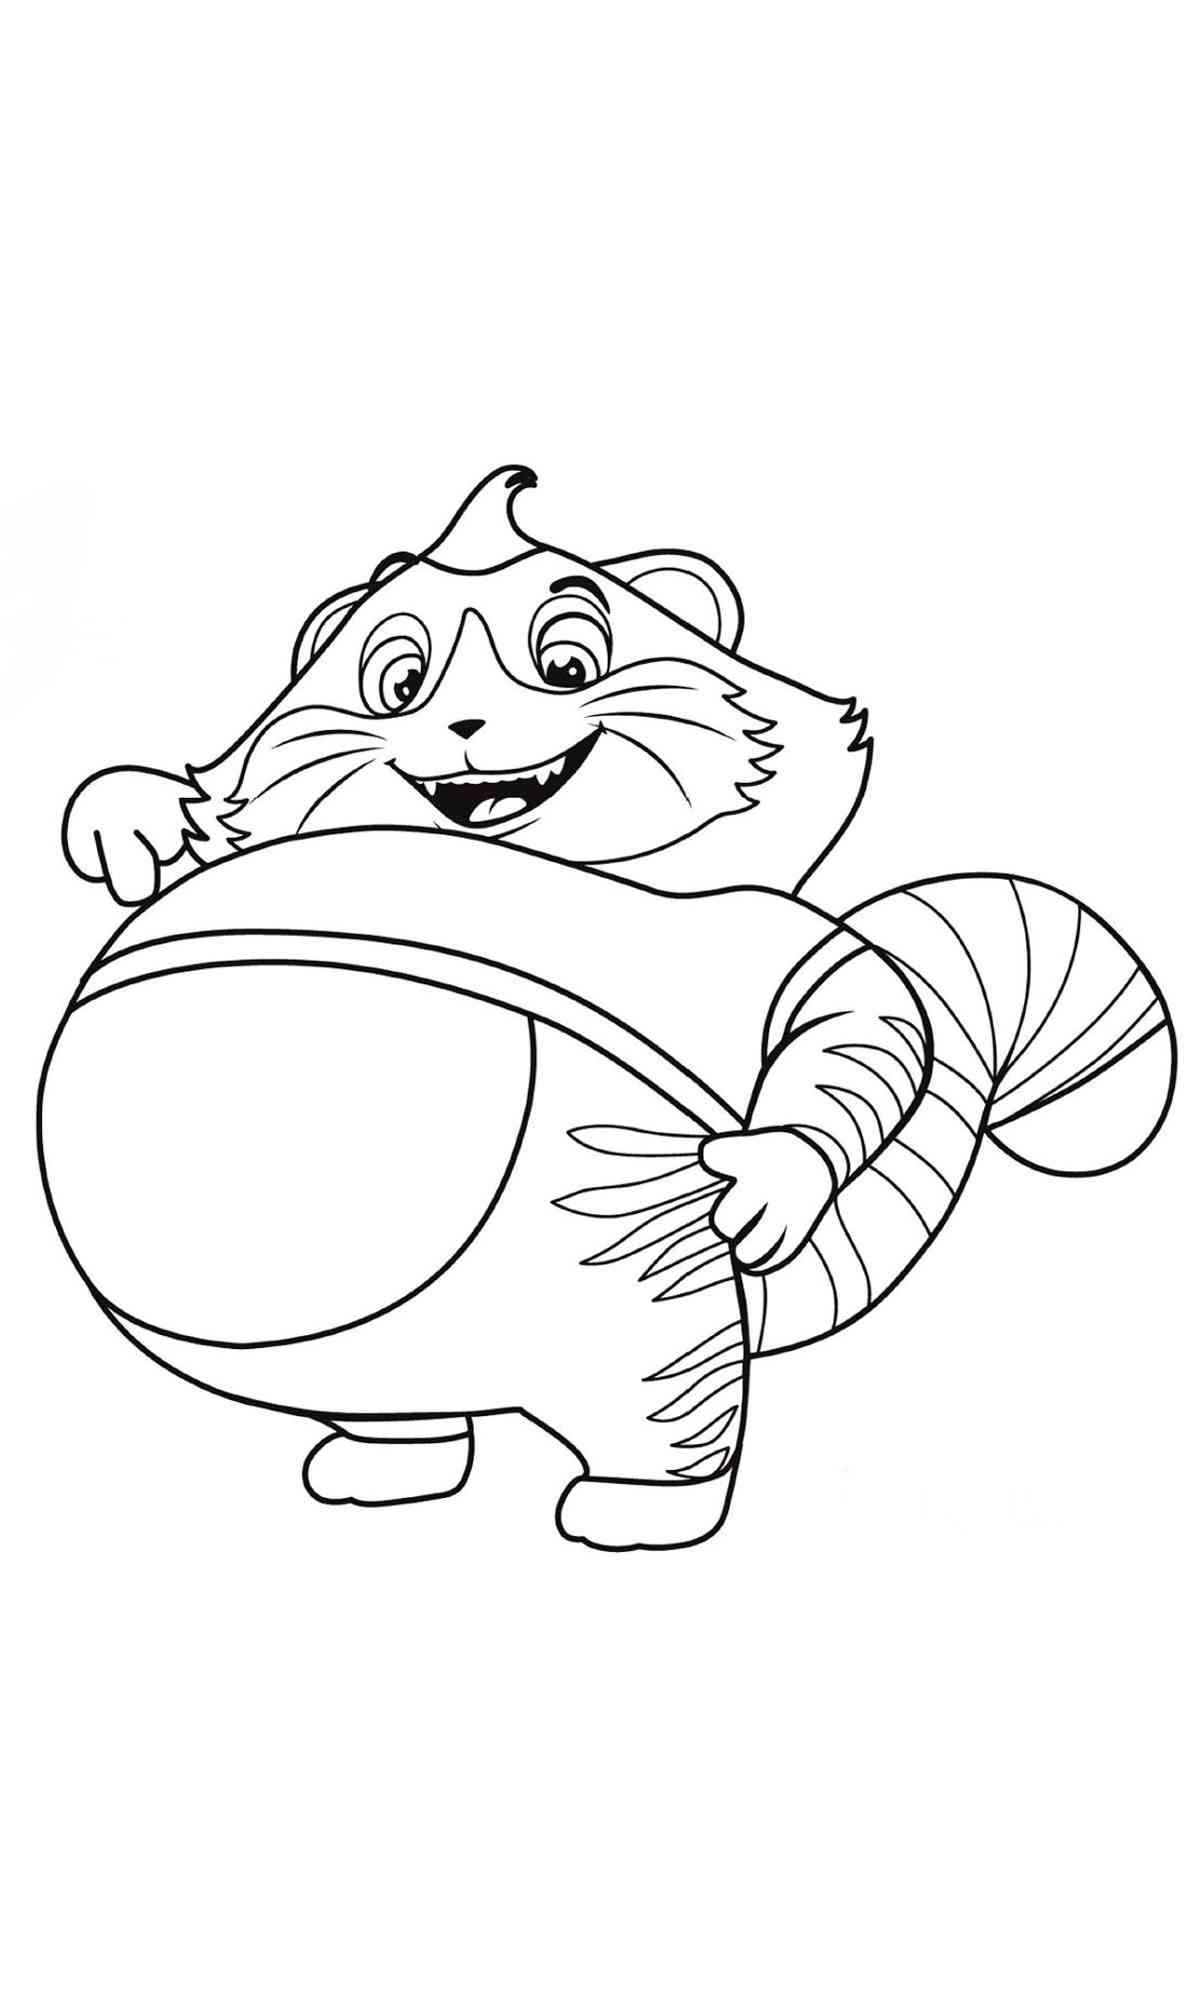 44 Cats coloring pages - SeaColoring